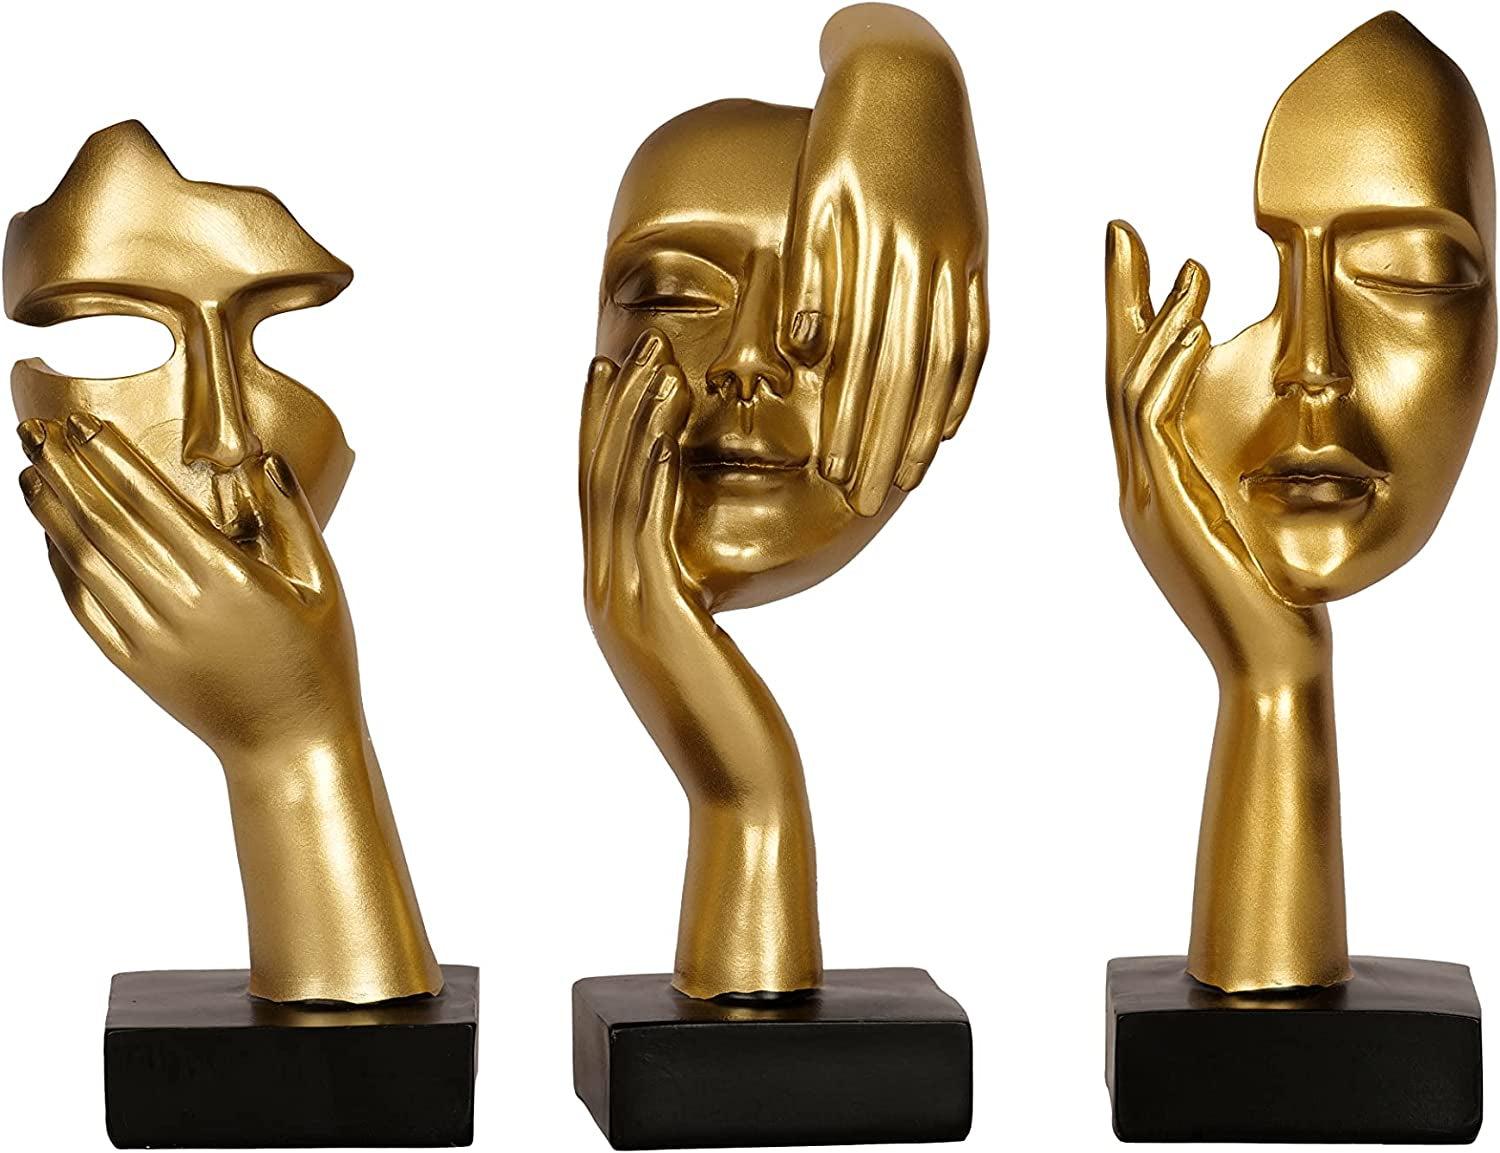 3 Piece Thinker Statue Gold Home Decor Abstract Sculpture Resin Thinker Figurines for Desktop Office Desk Living Room Collection Cute Accent Figurine Decoration (Gold)